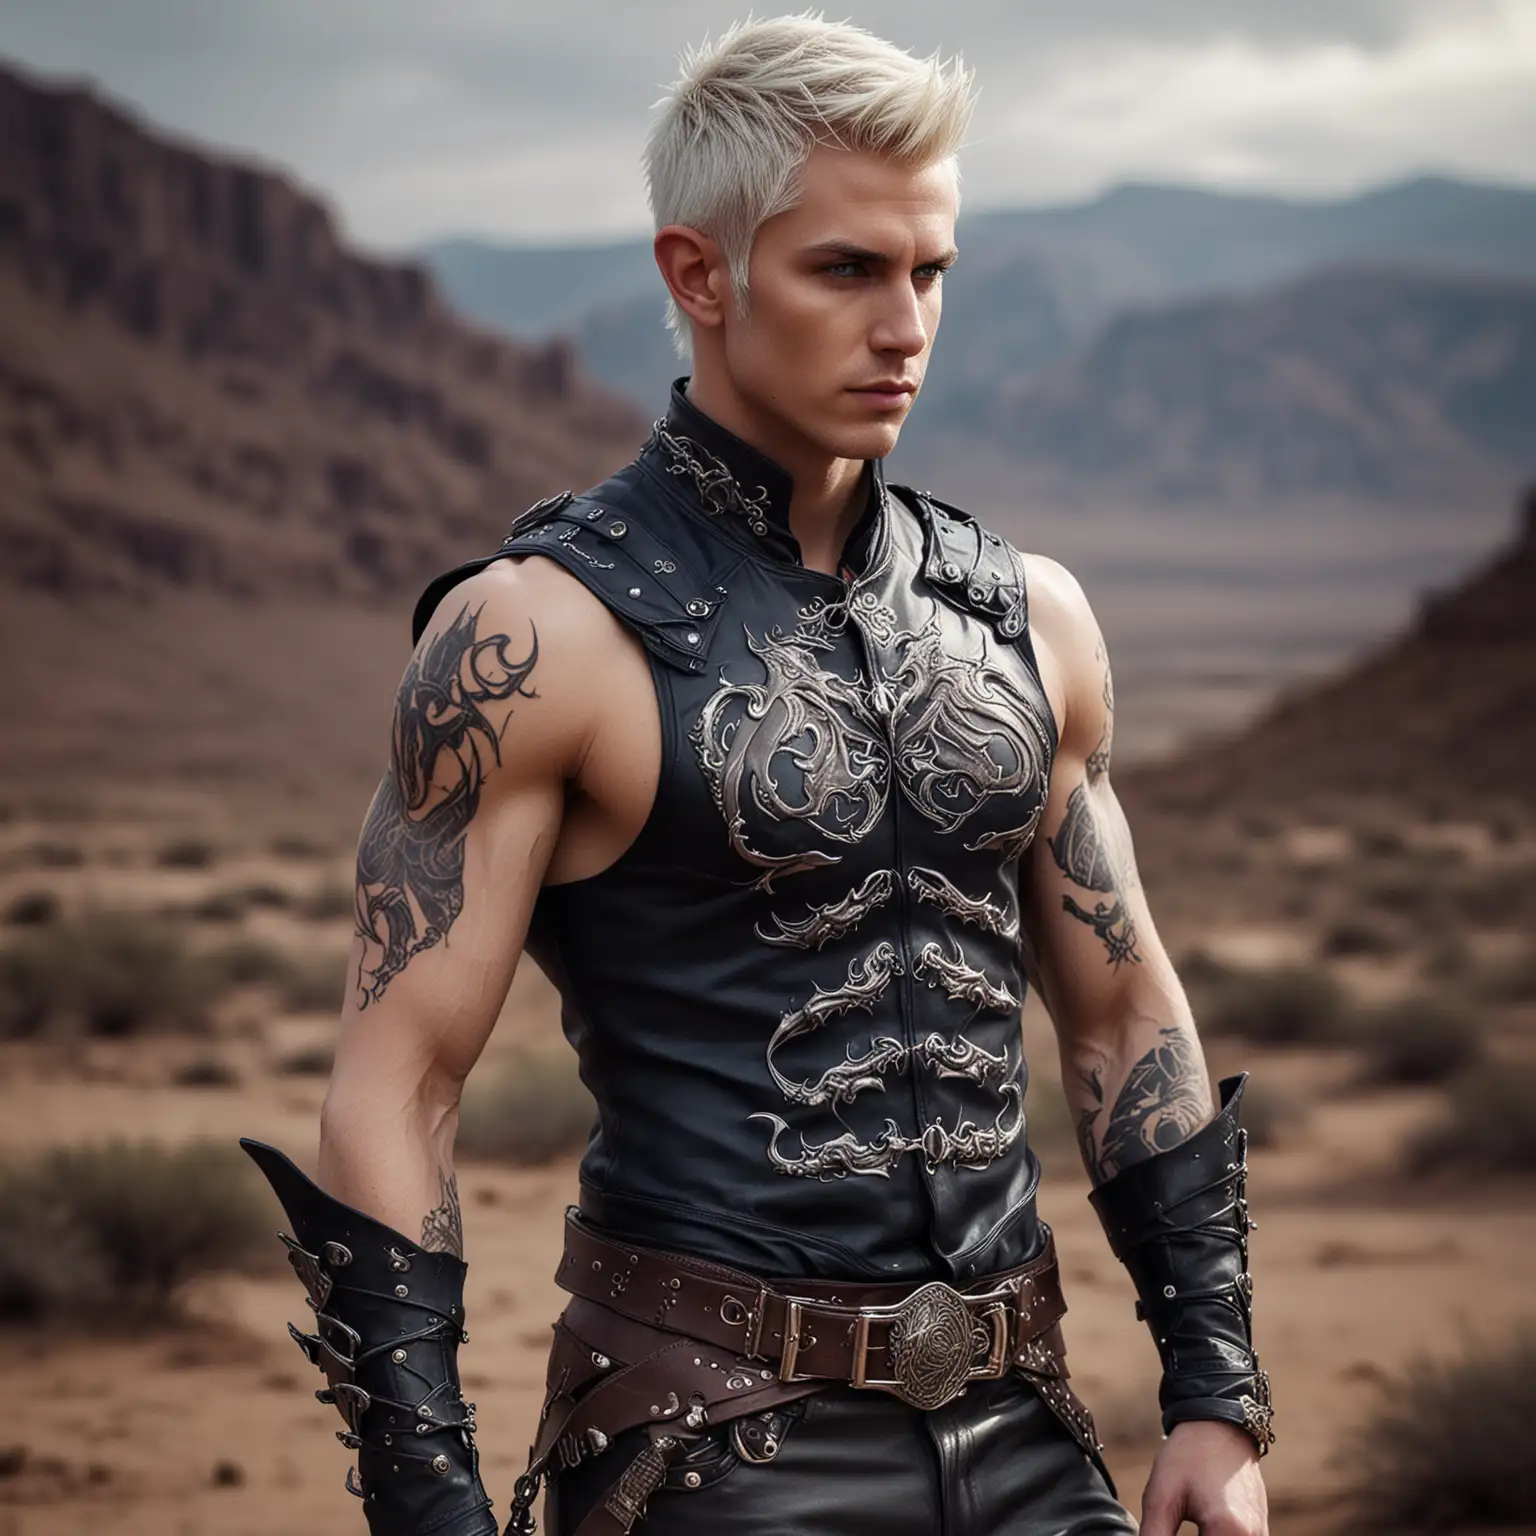 Fantasy Male Elf Dragon Rider with Tattoos and Leather Armor